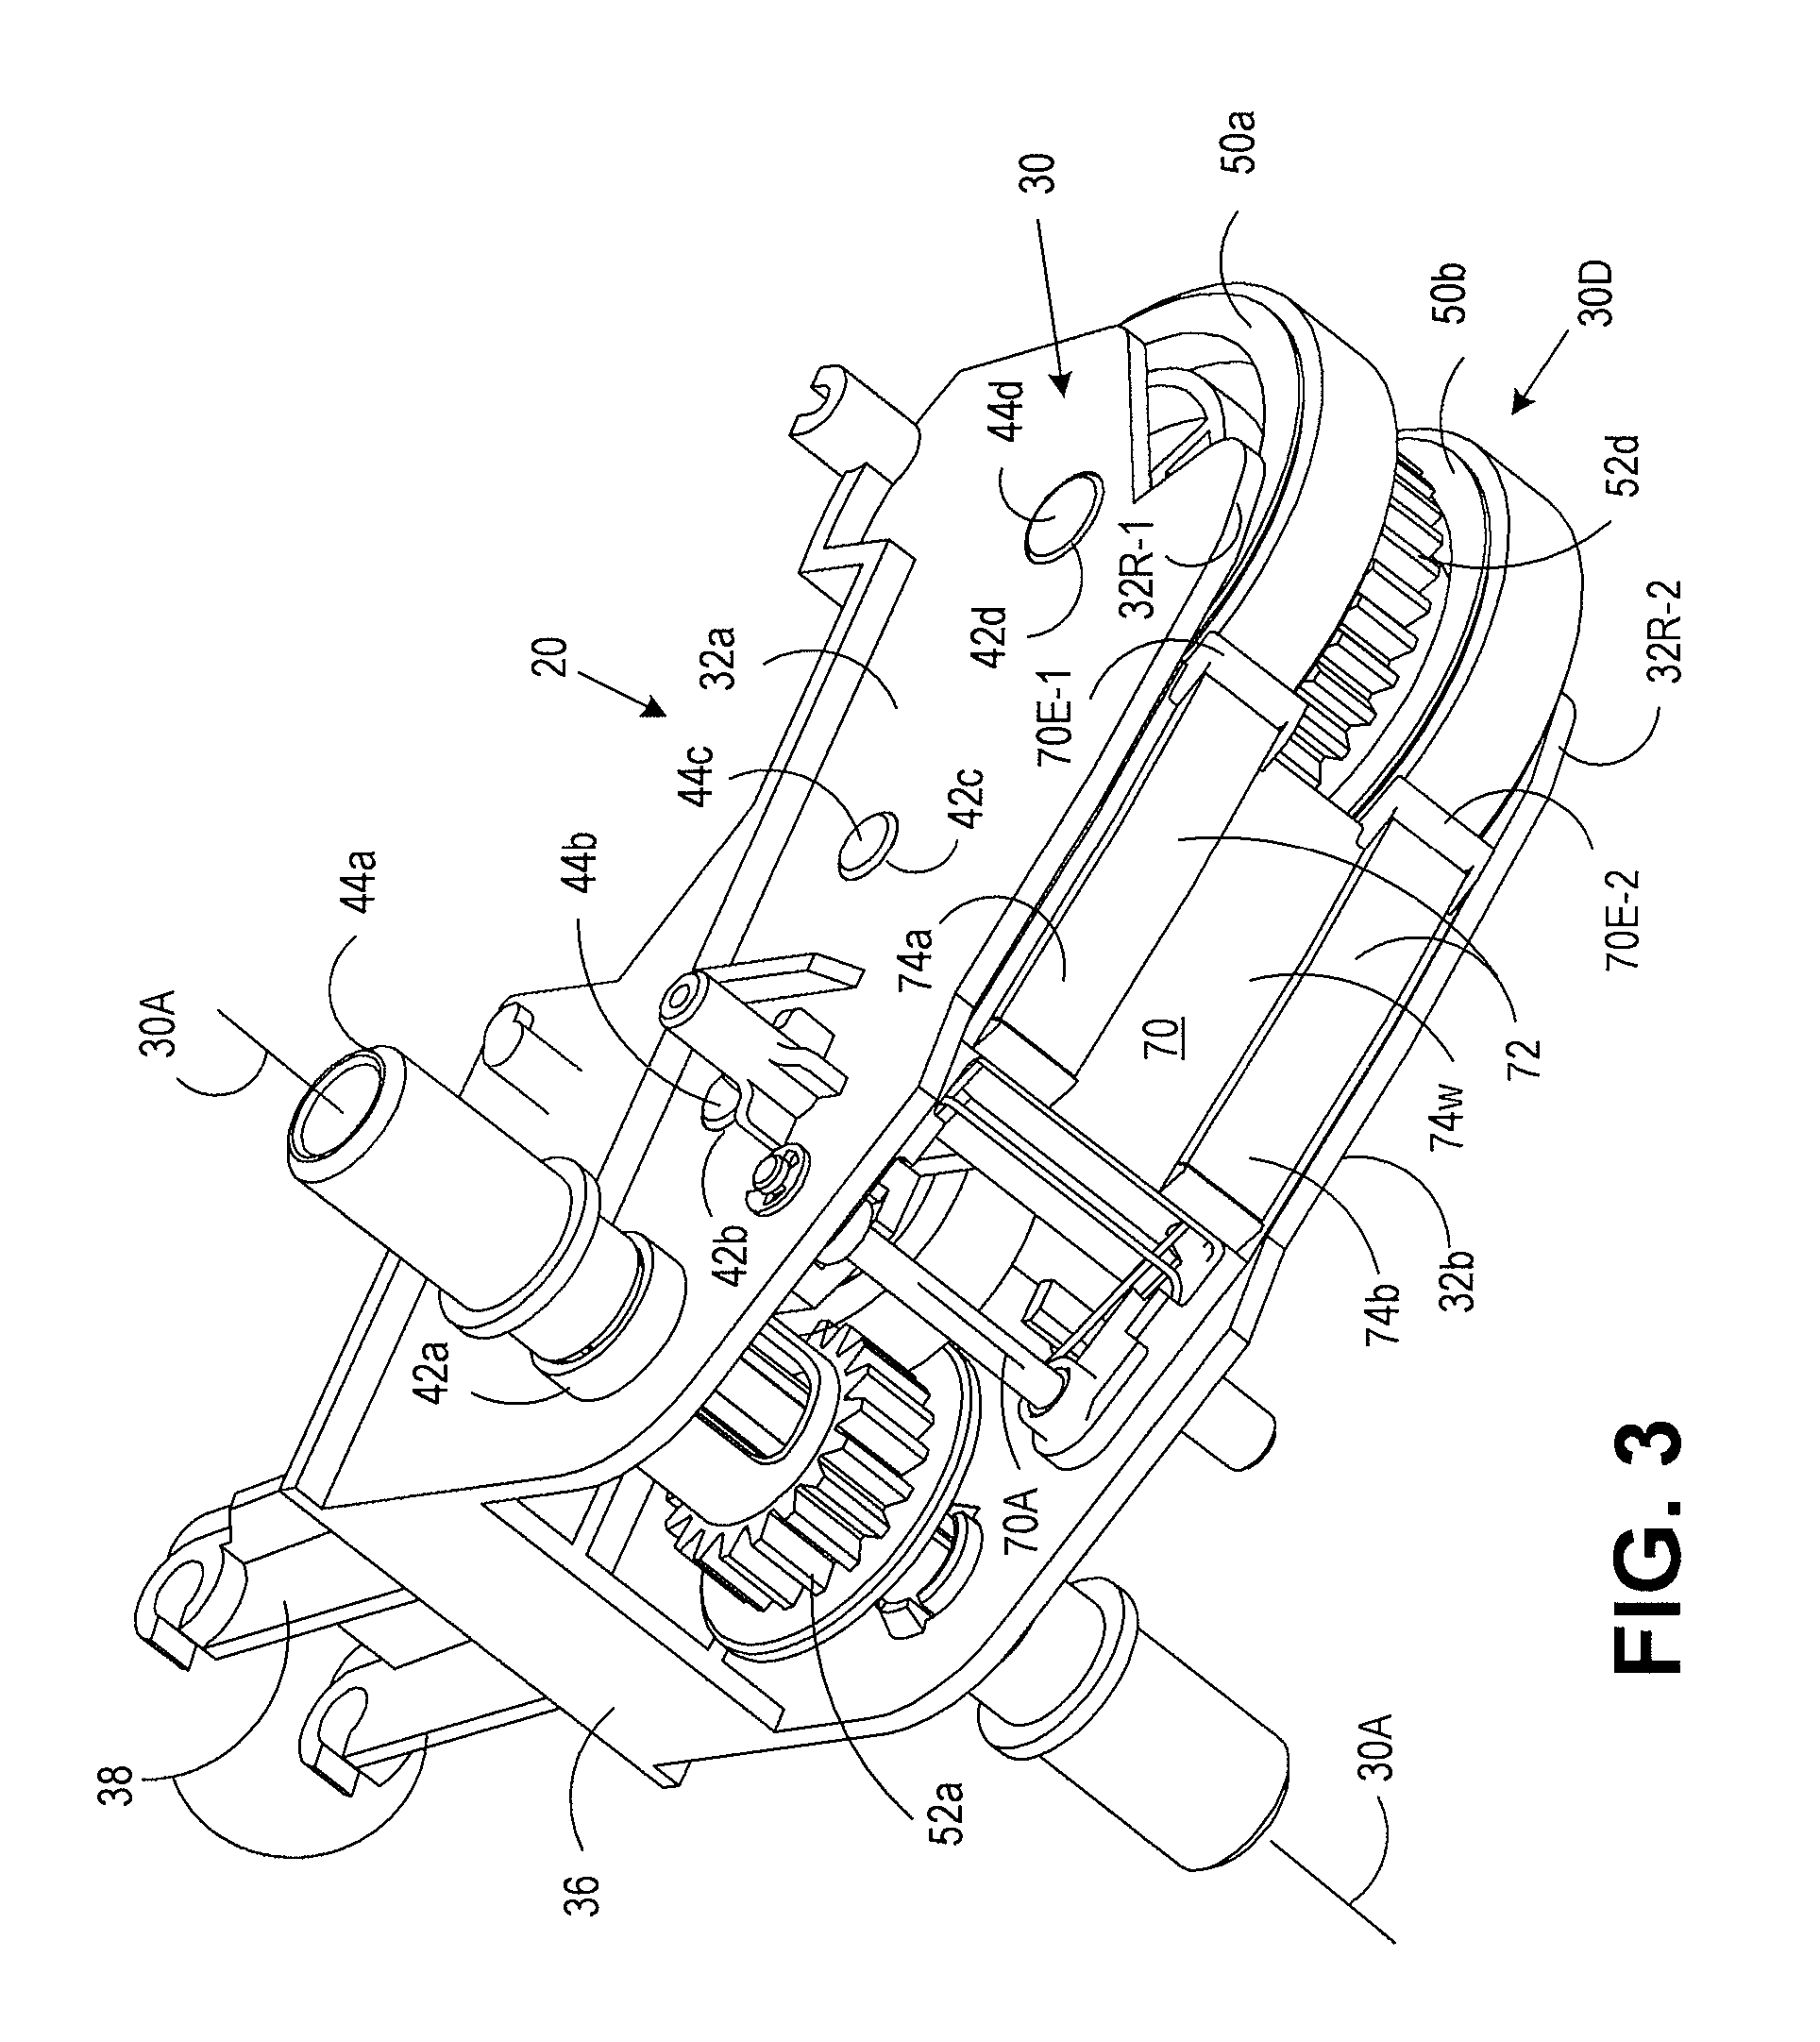 Ingestion guide assembly for augmenting sheet material separation in a singulating apparatus